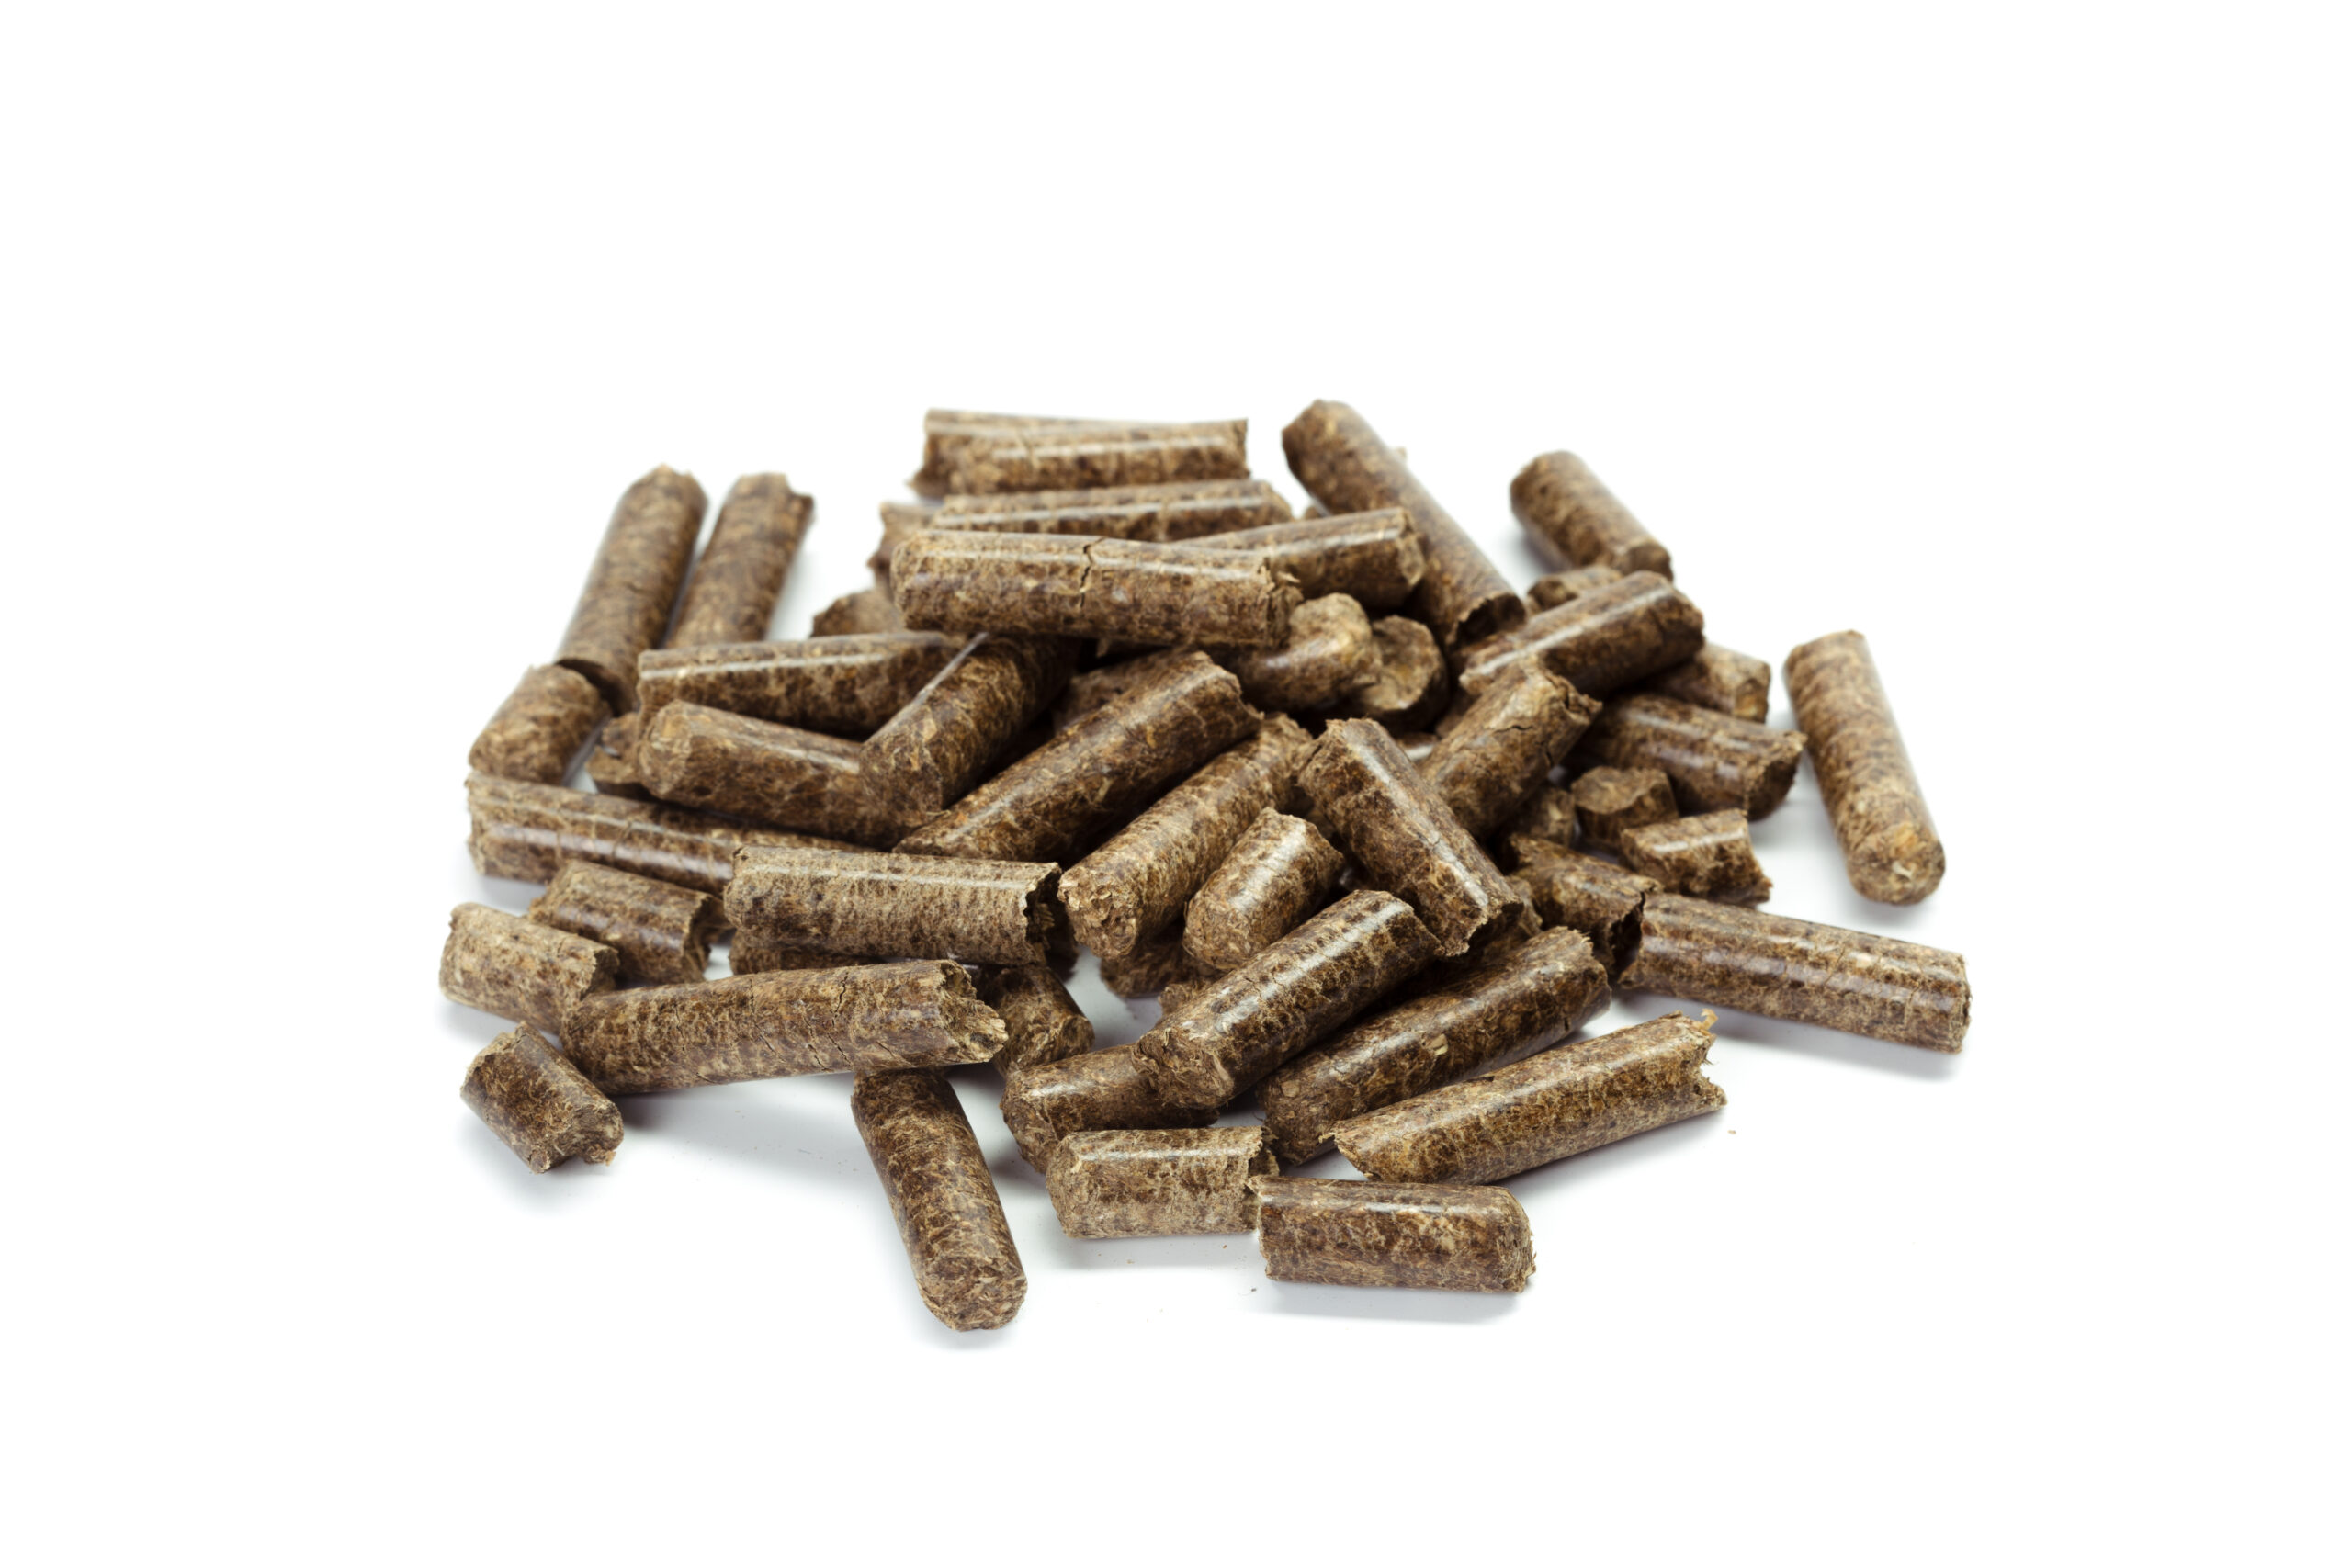 stack of wooden pellets for bio energy, white background, isolated